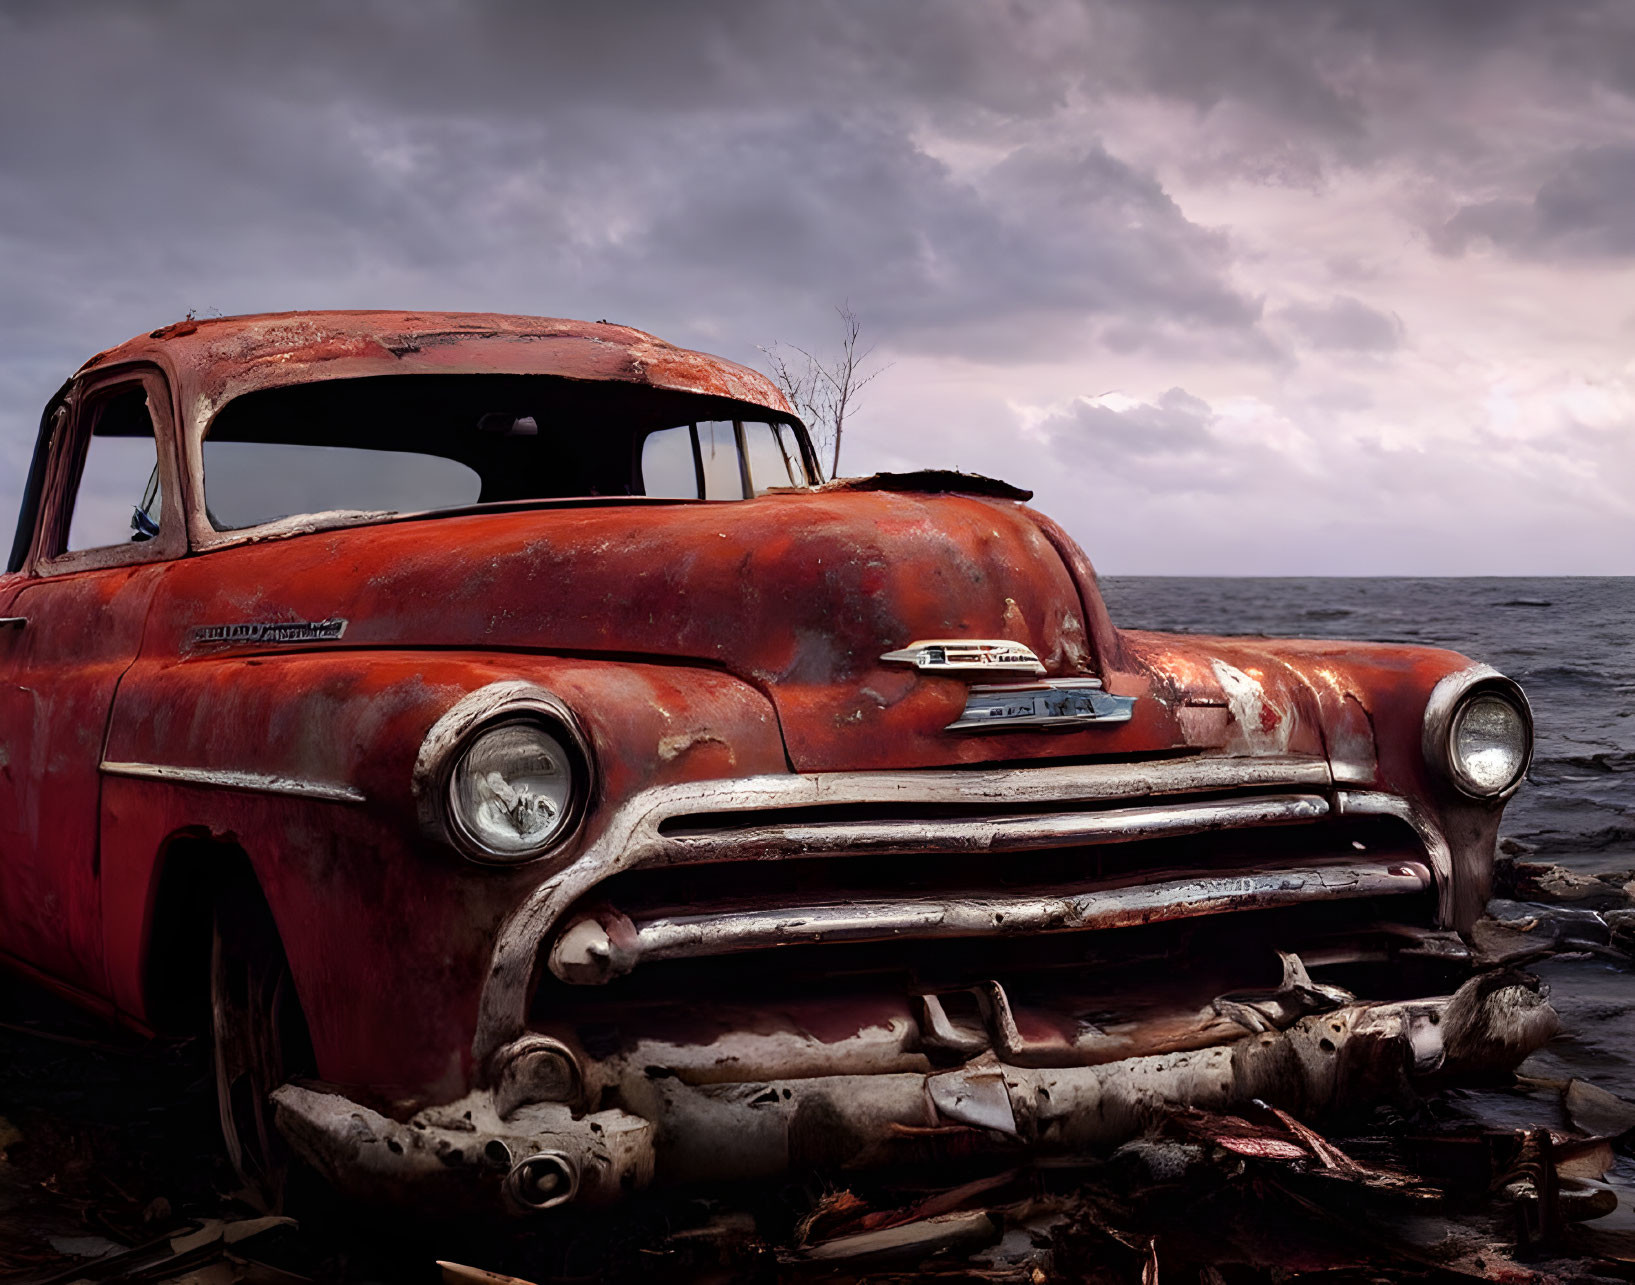 Rusty Chevrolet pickup truck by stormy sea with faded red paint